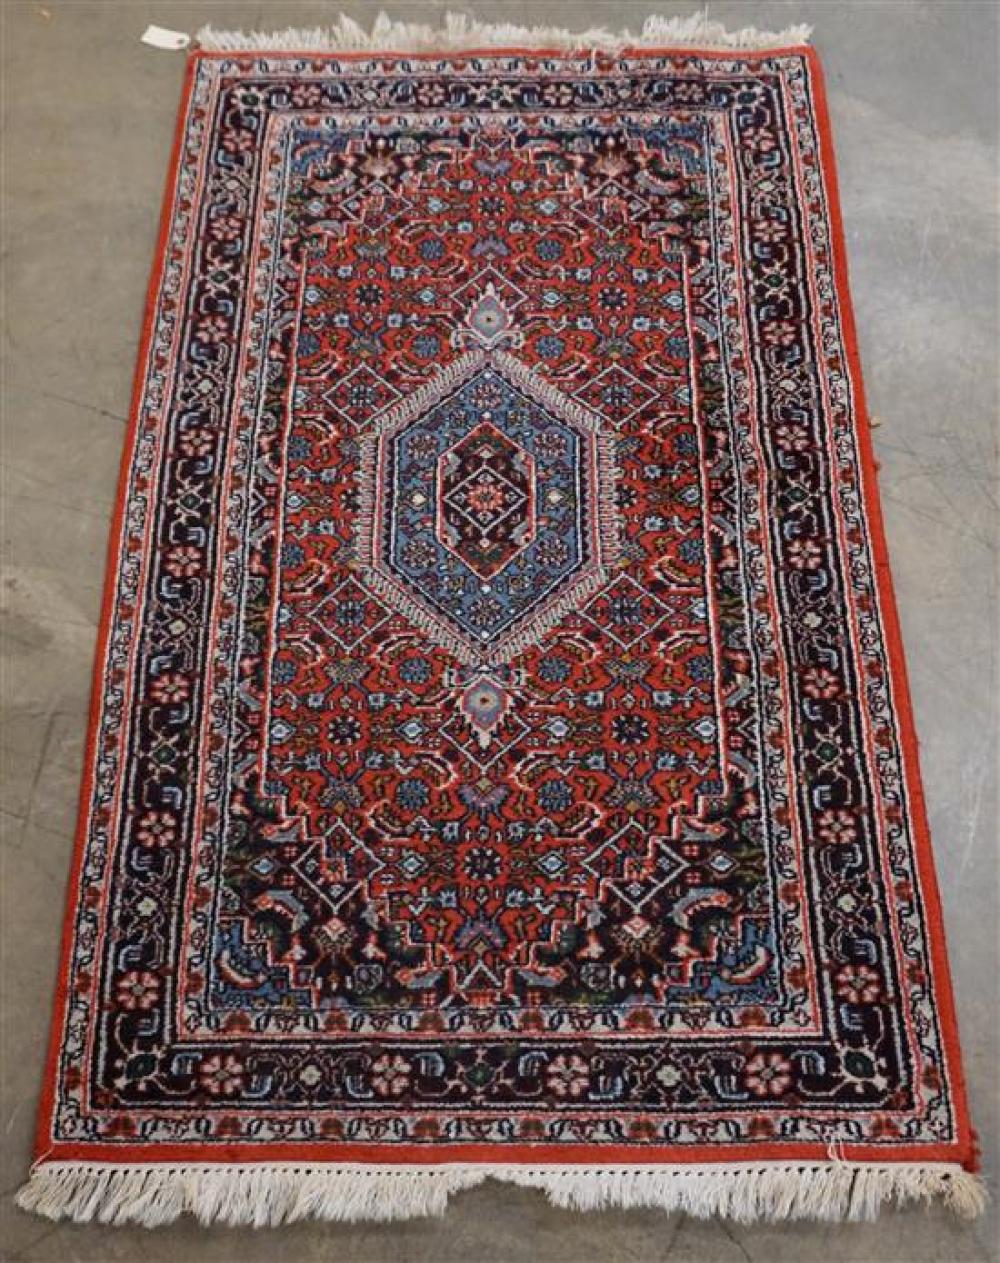 INDO-SARABAND RUG, 5 FT 3 IN, X